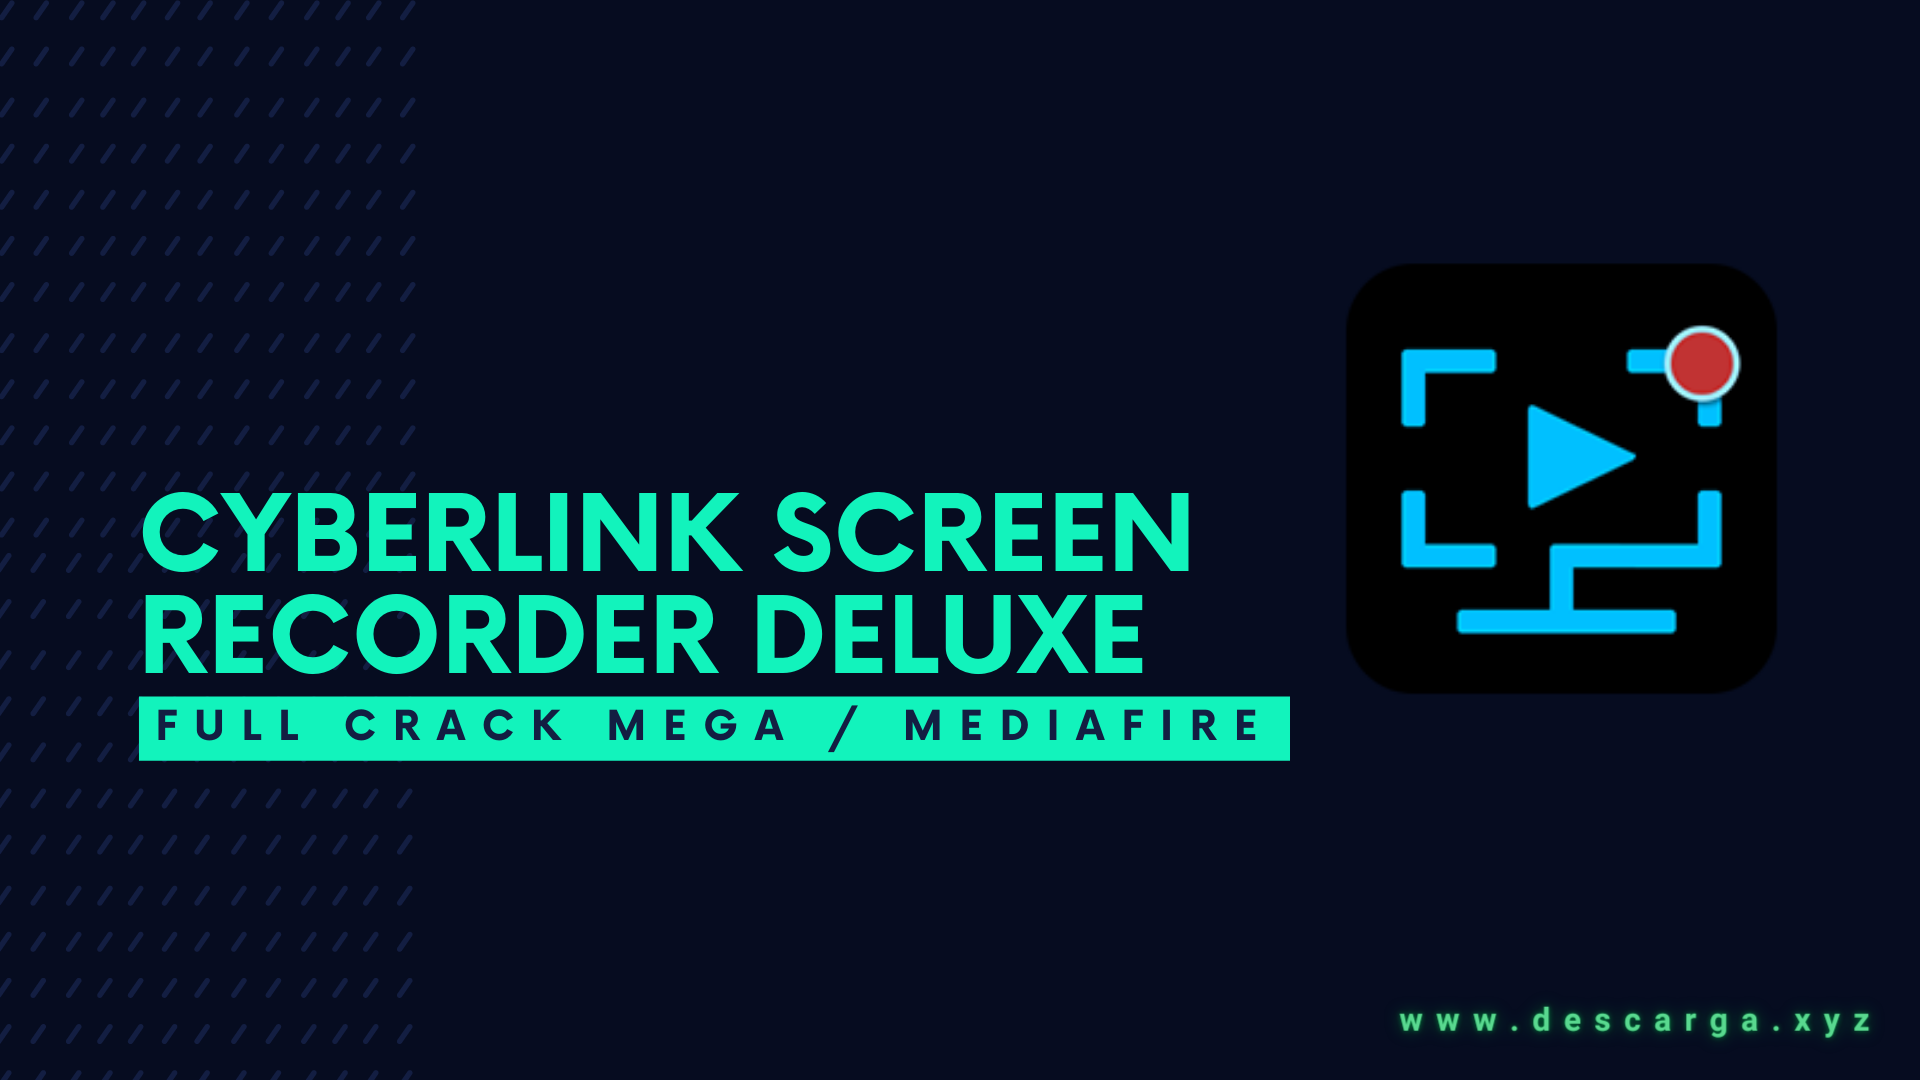 download the last version for ipod CyberLink Screen Recorder Deluxe 4.3.1.27960